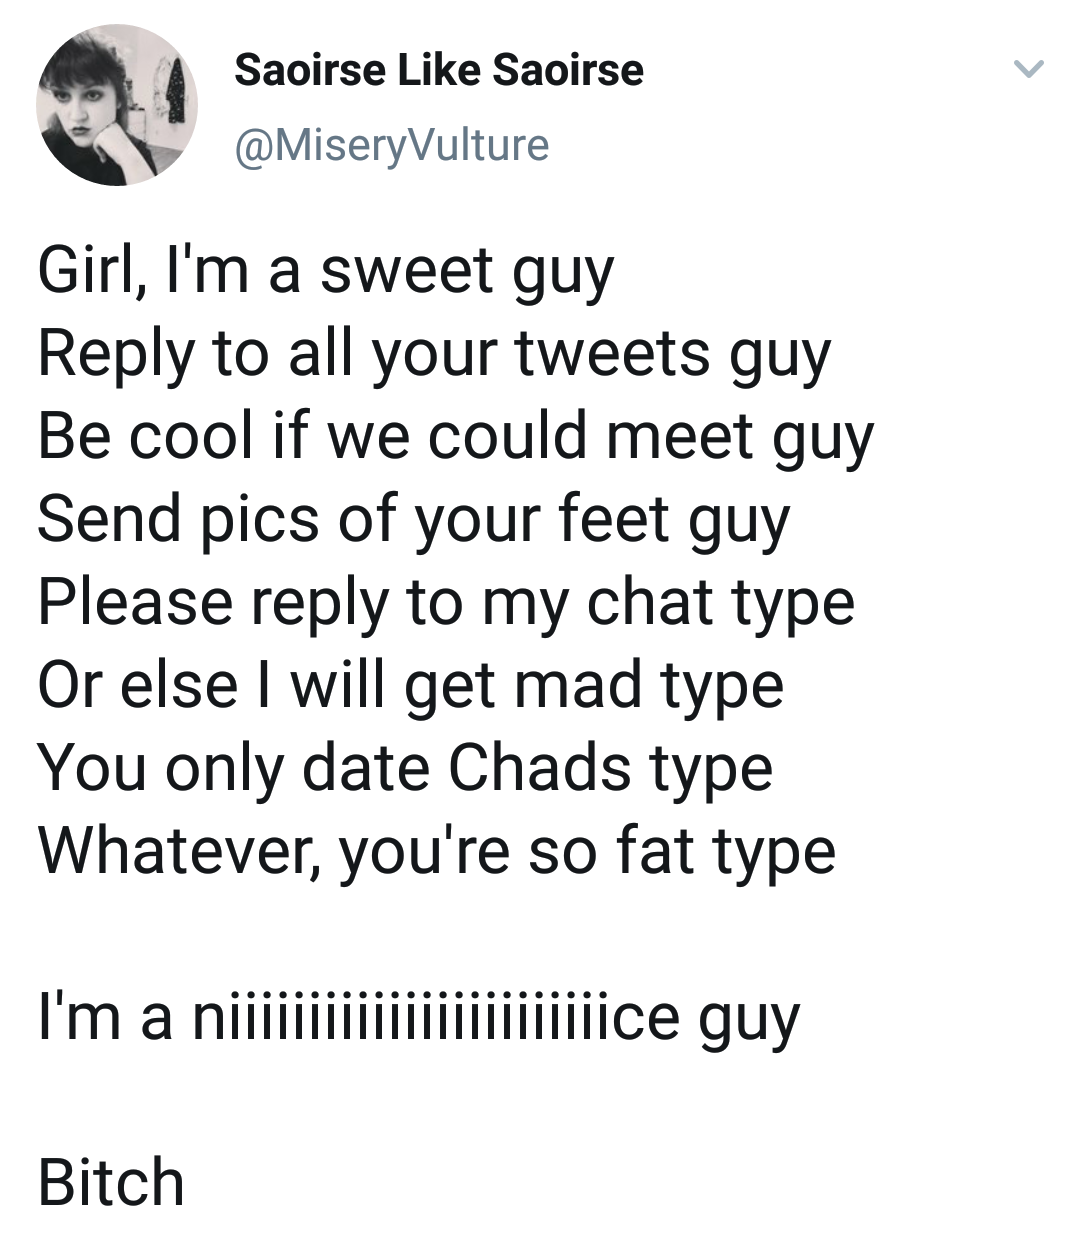 animal - Saoirse Saoirse Girl, I'm a sweet guy to all your tweets guy Be cool if we could meet guy Send pics of your feet guy Please to my chat type Or else I will get mad type You only date Chads type Whatever, you're so fat type . . . . I'm a…